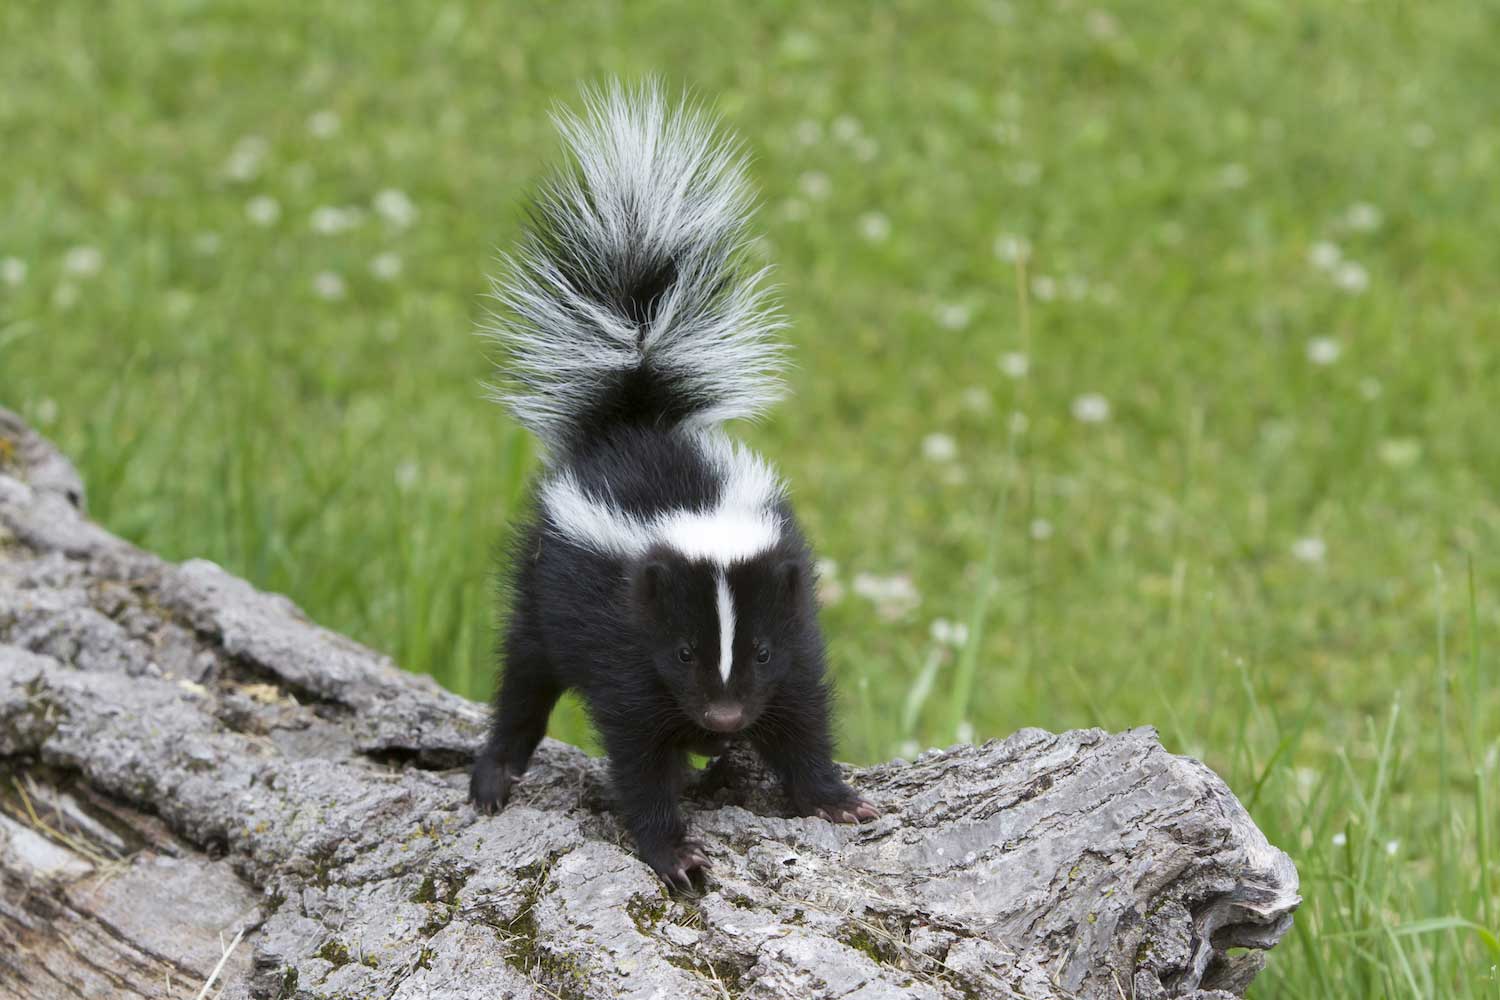 A young skunk on a log.